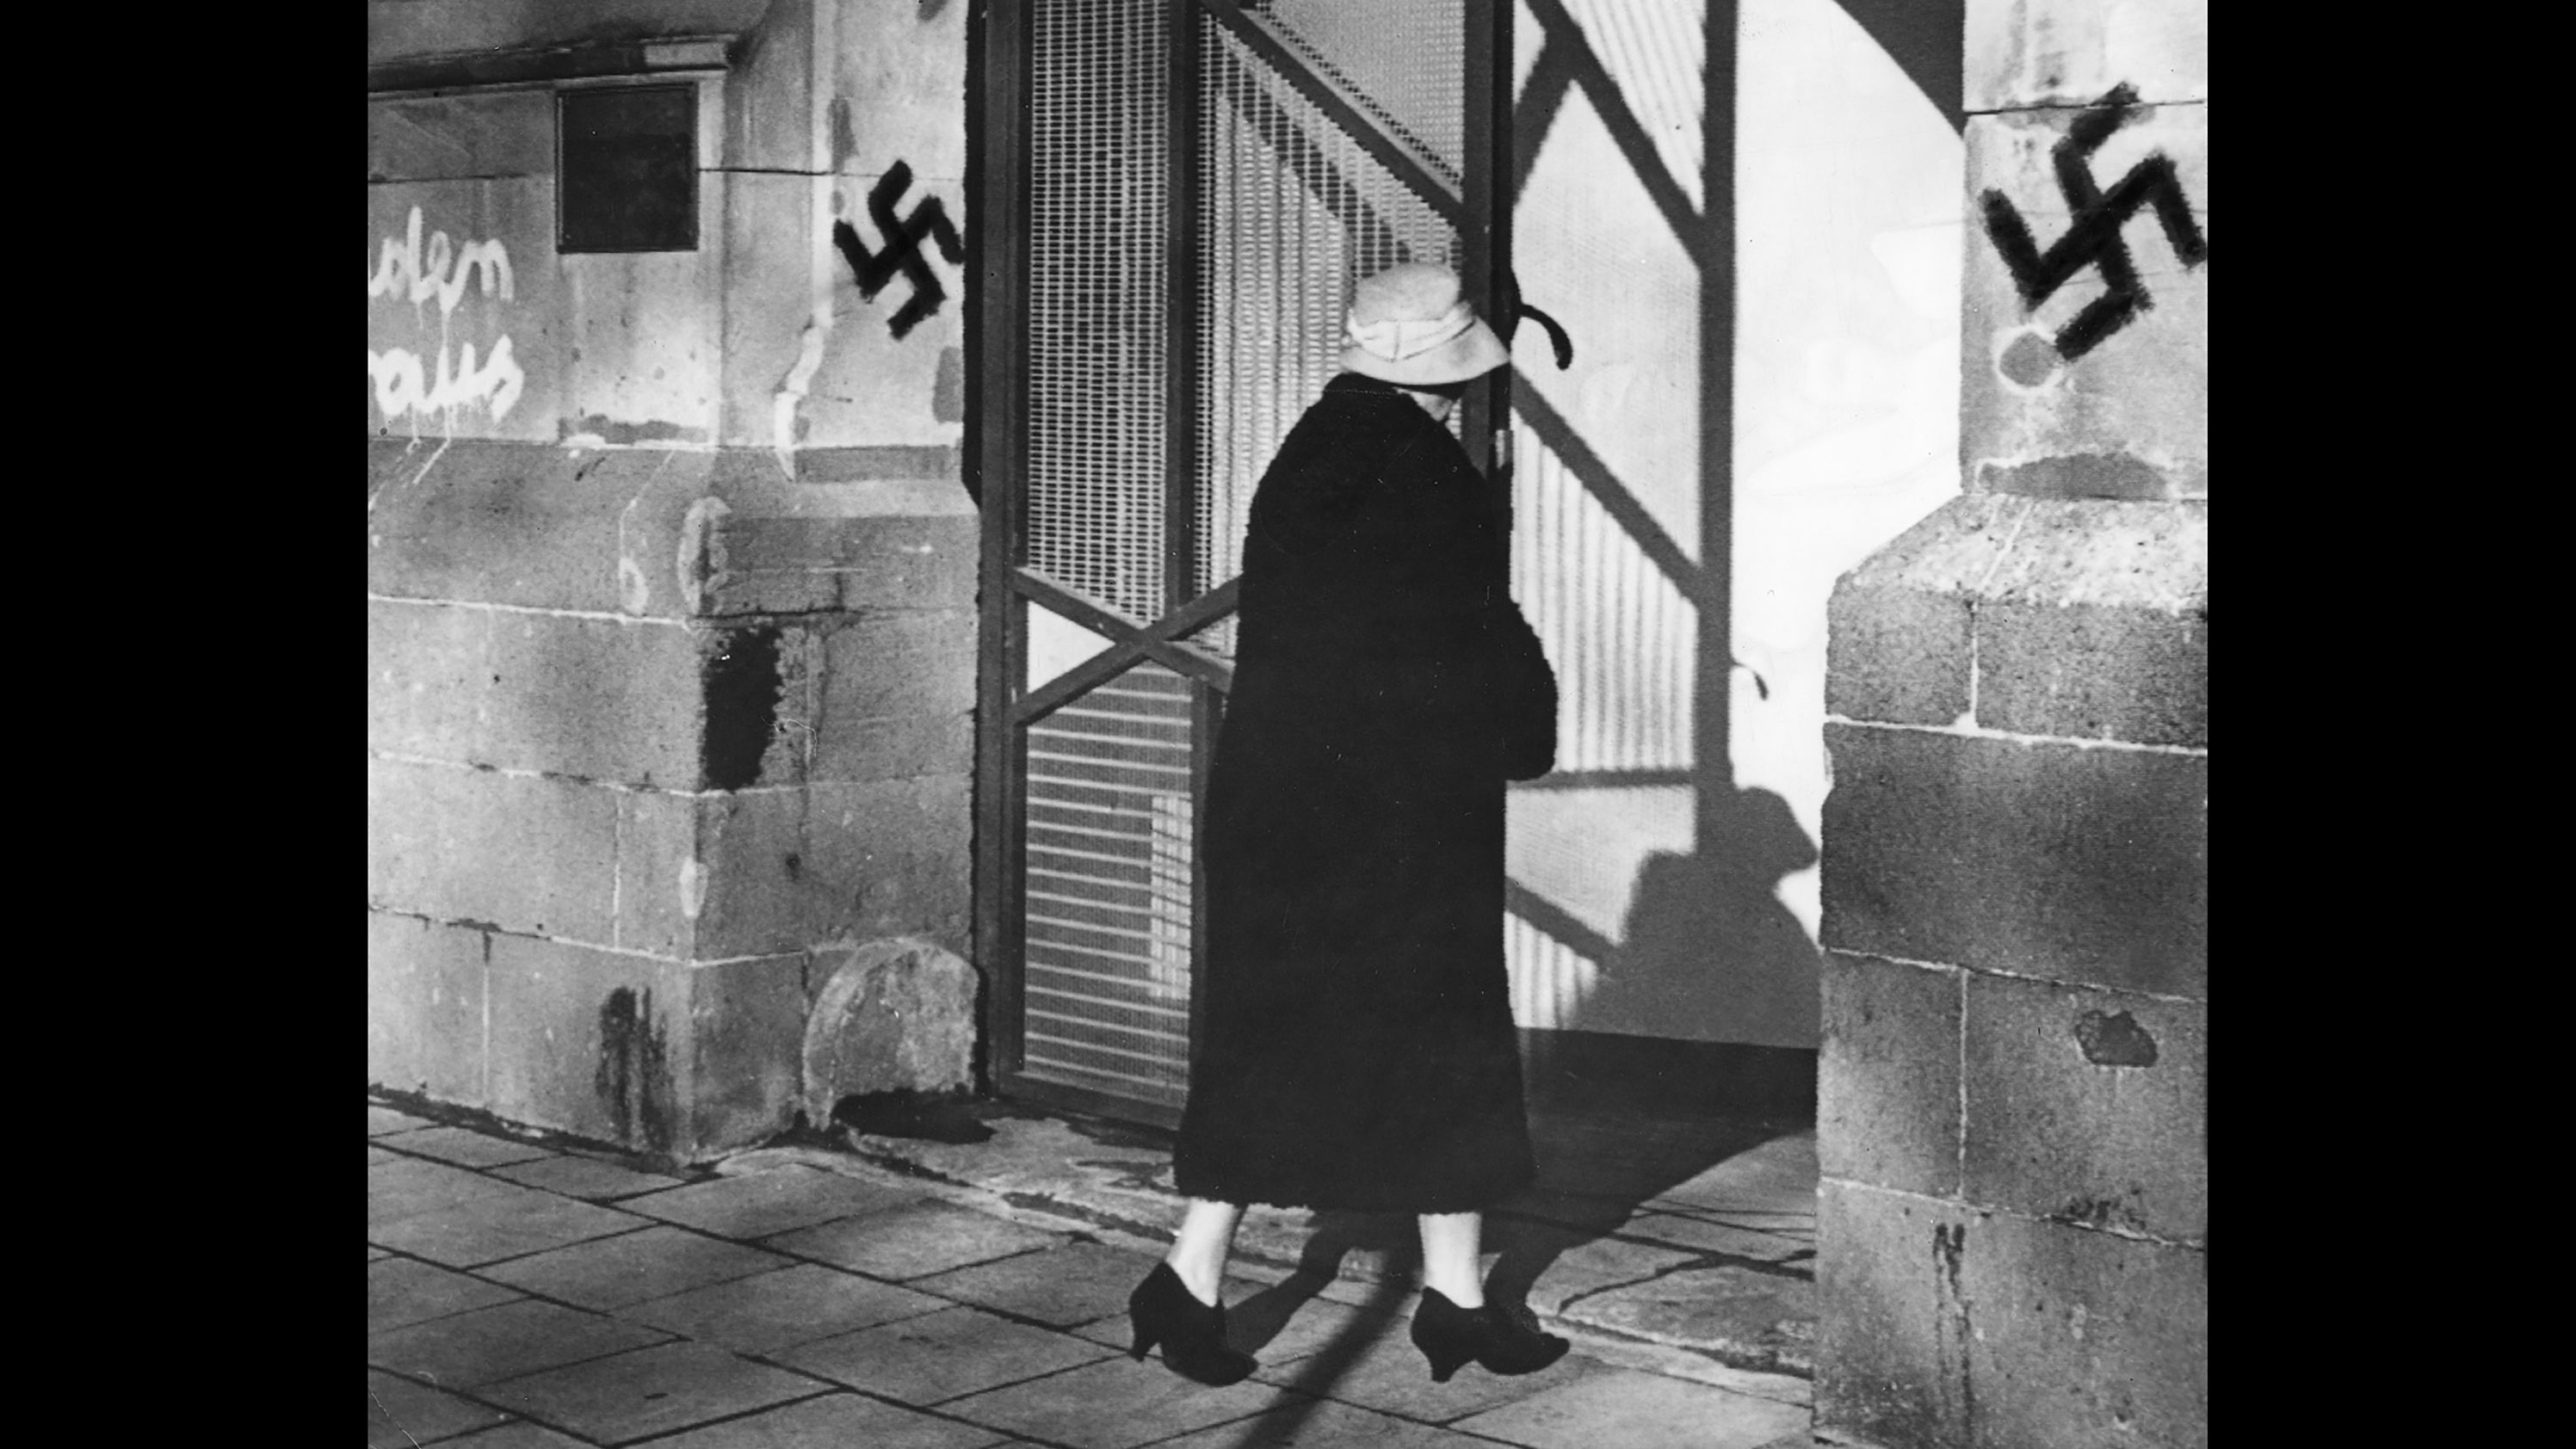 In 1959, a synagogue in Cologne, Germany, was one of the places desecrated with Nazi imagery.